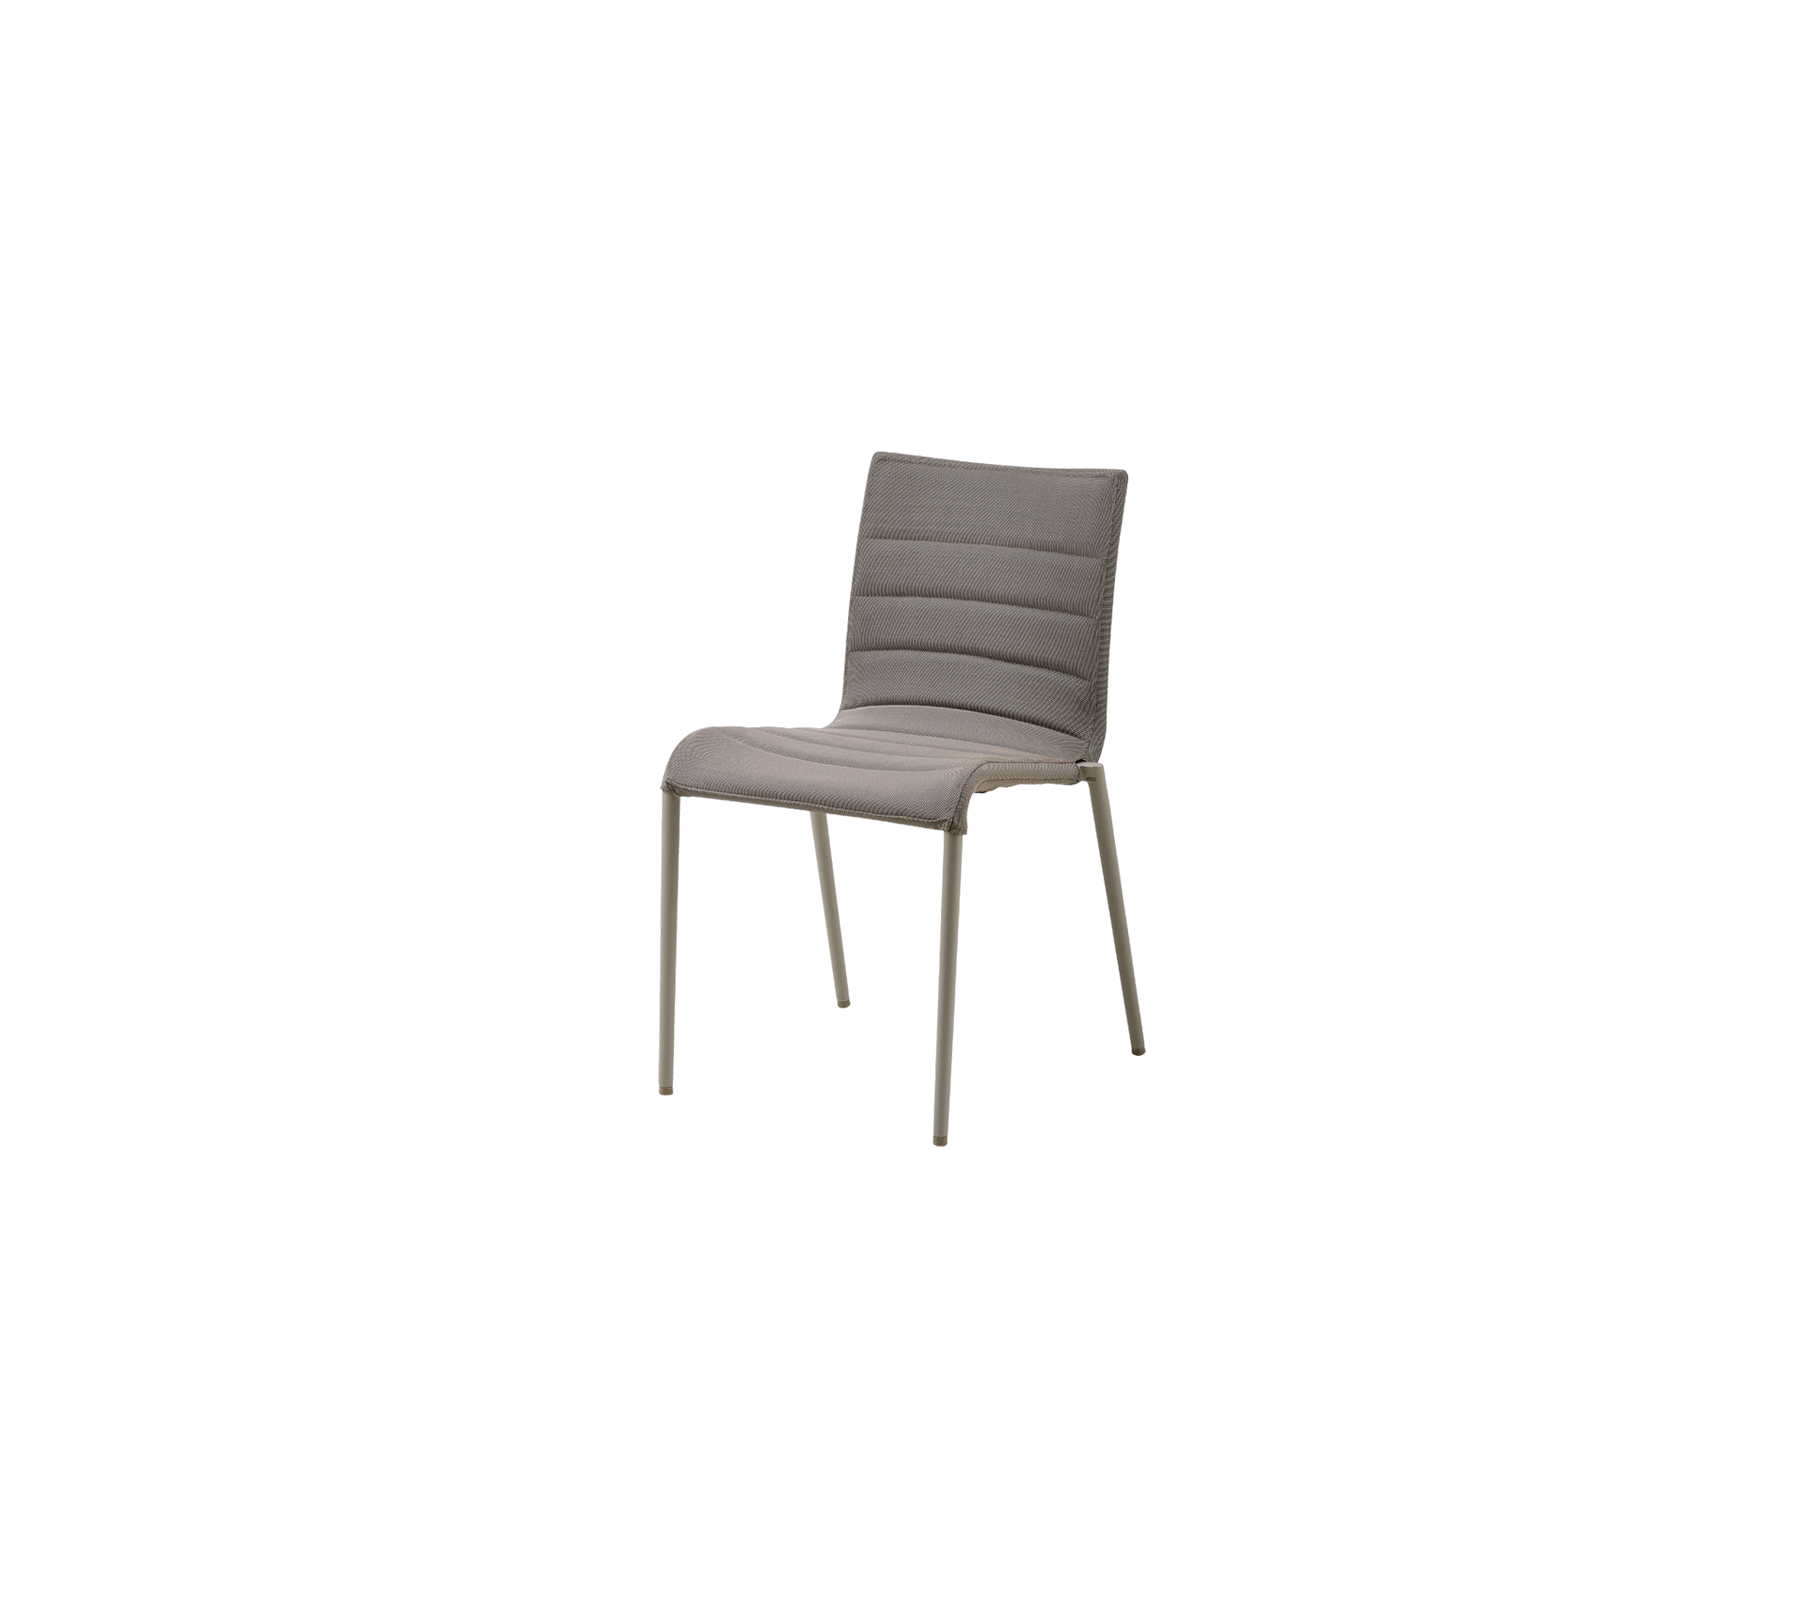 Core chair